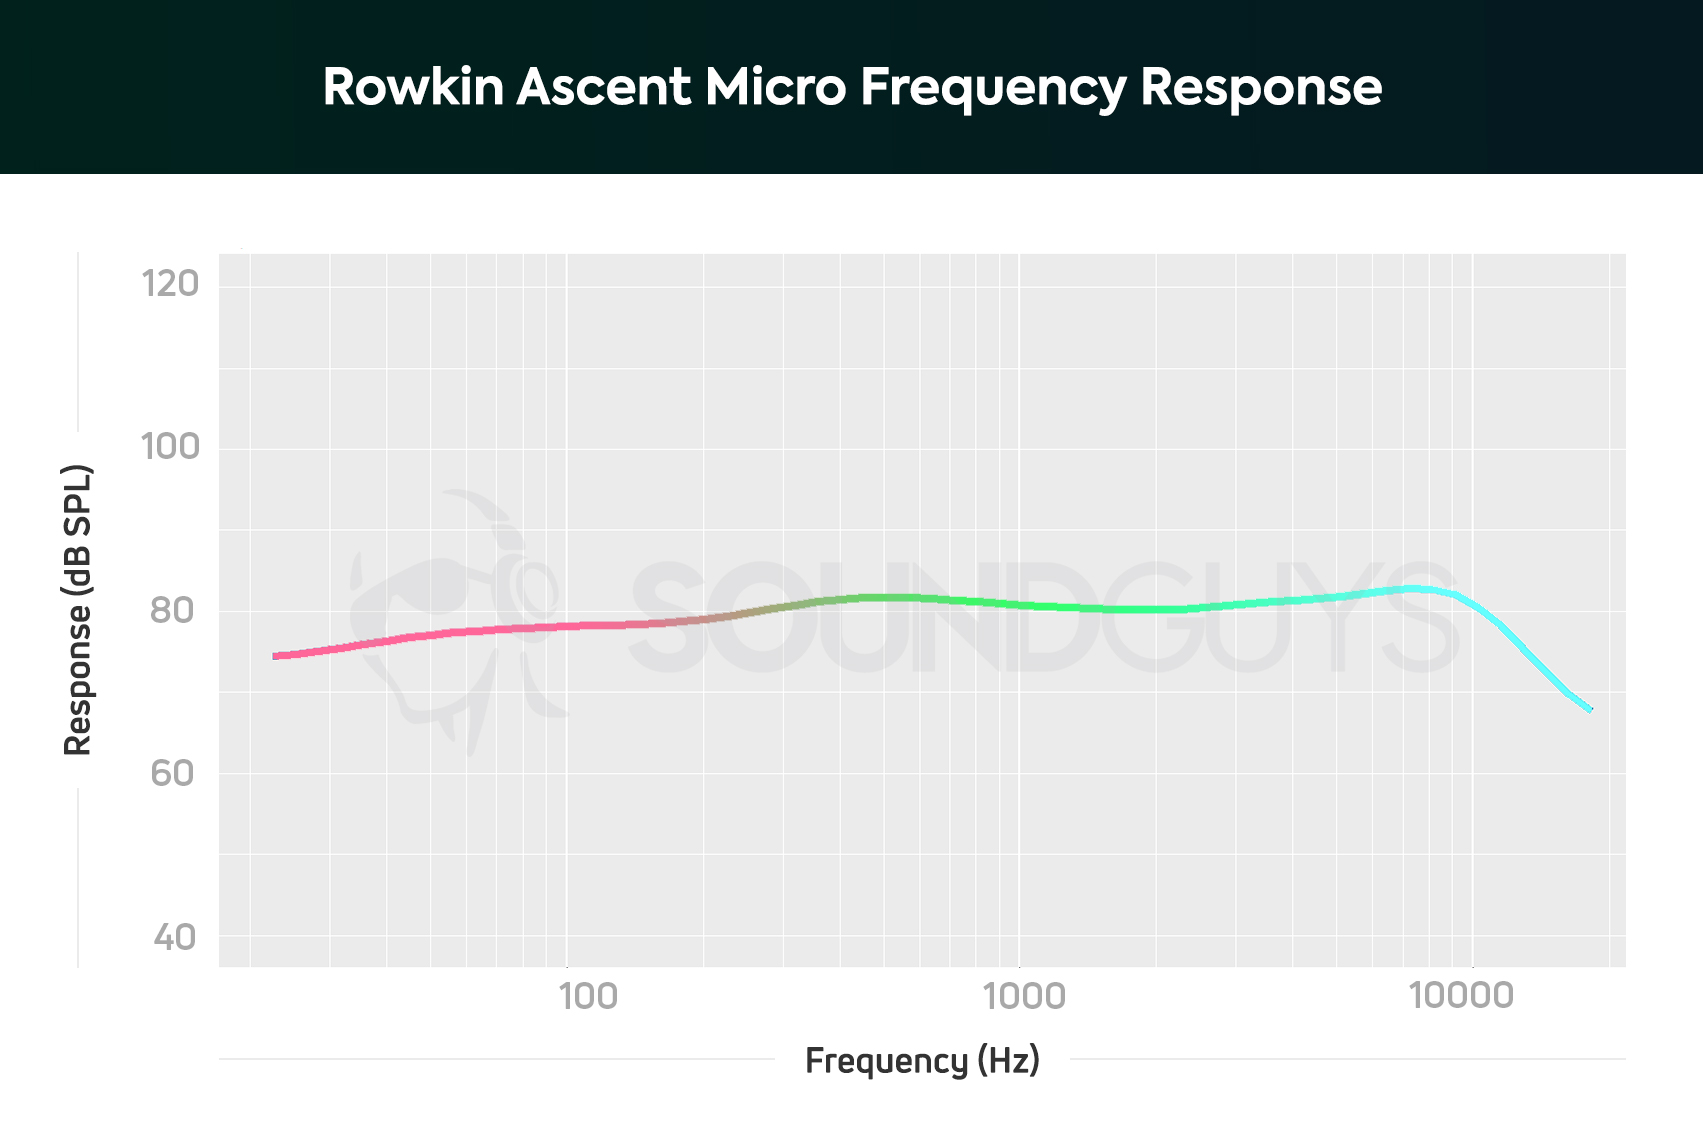 Rowkin Ascent Micro frequency response graph color-coded to indicate the different frequency ranges.